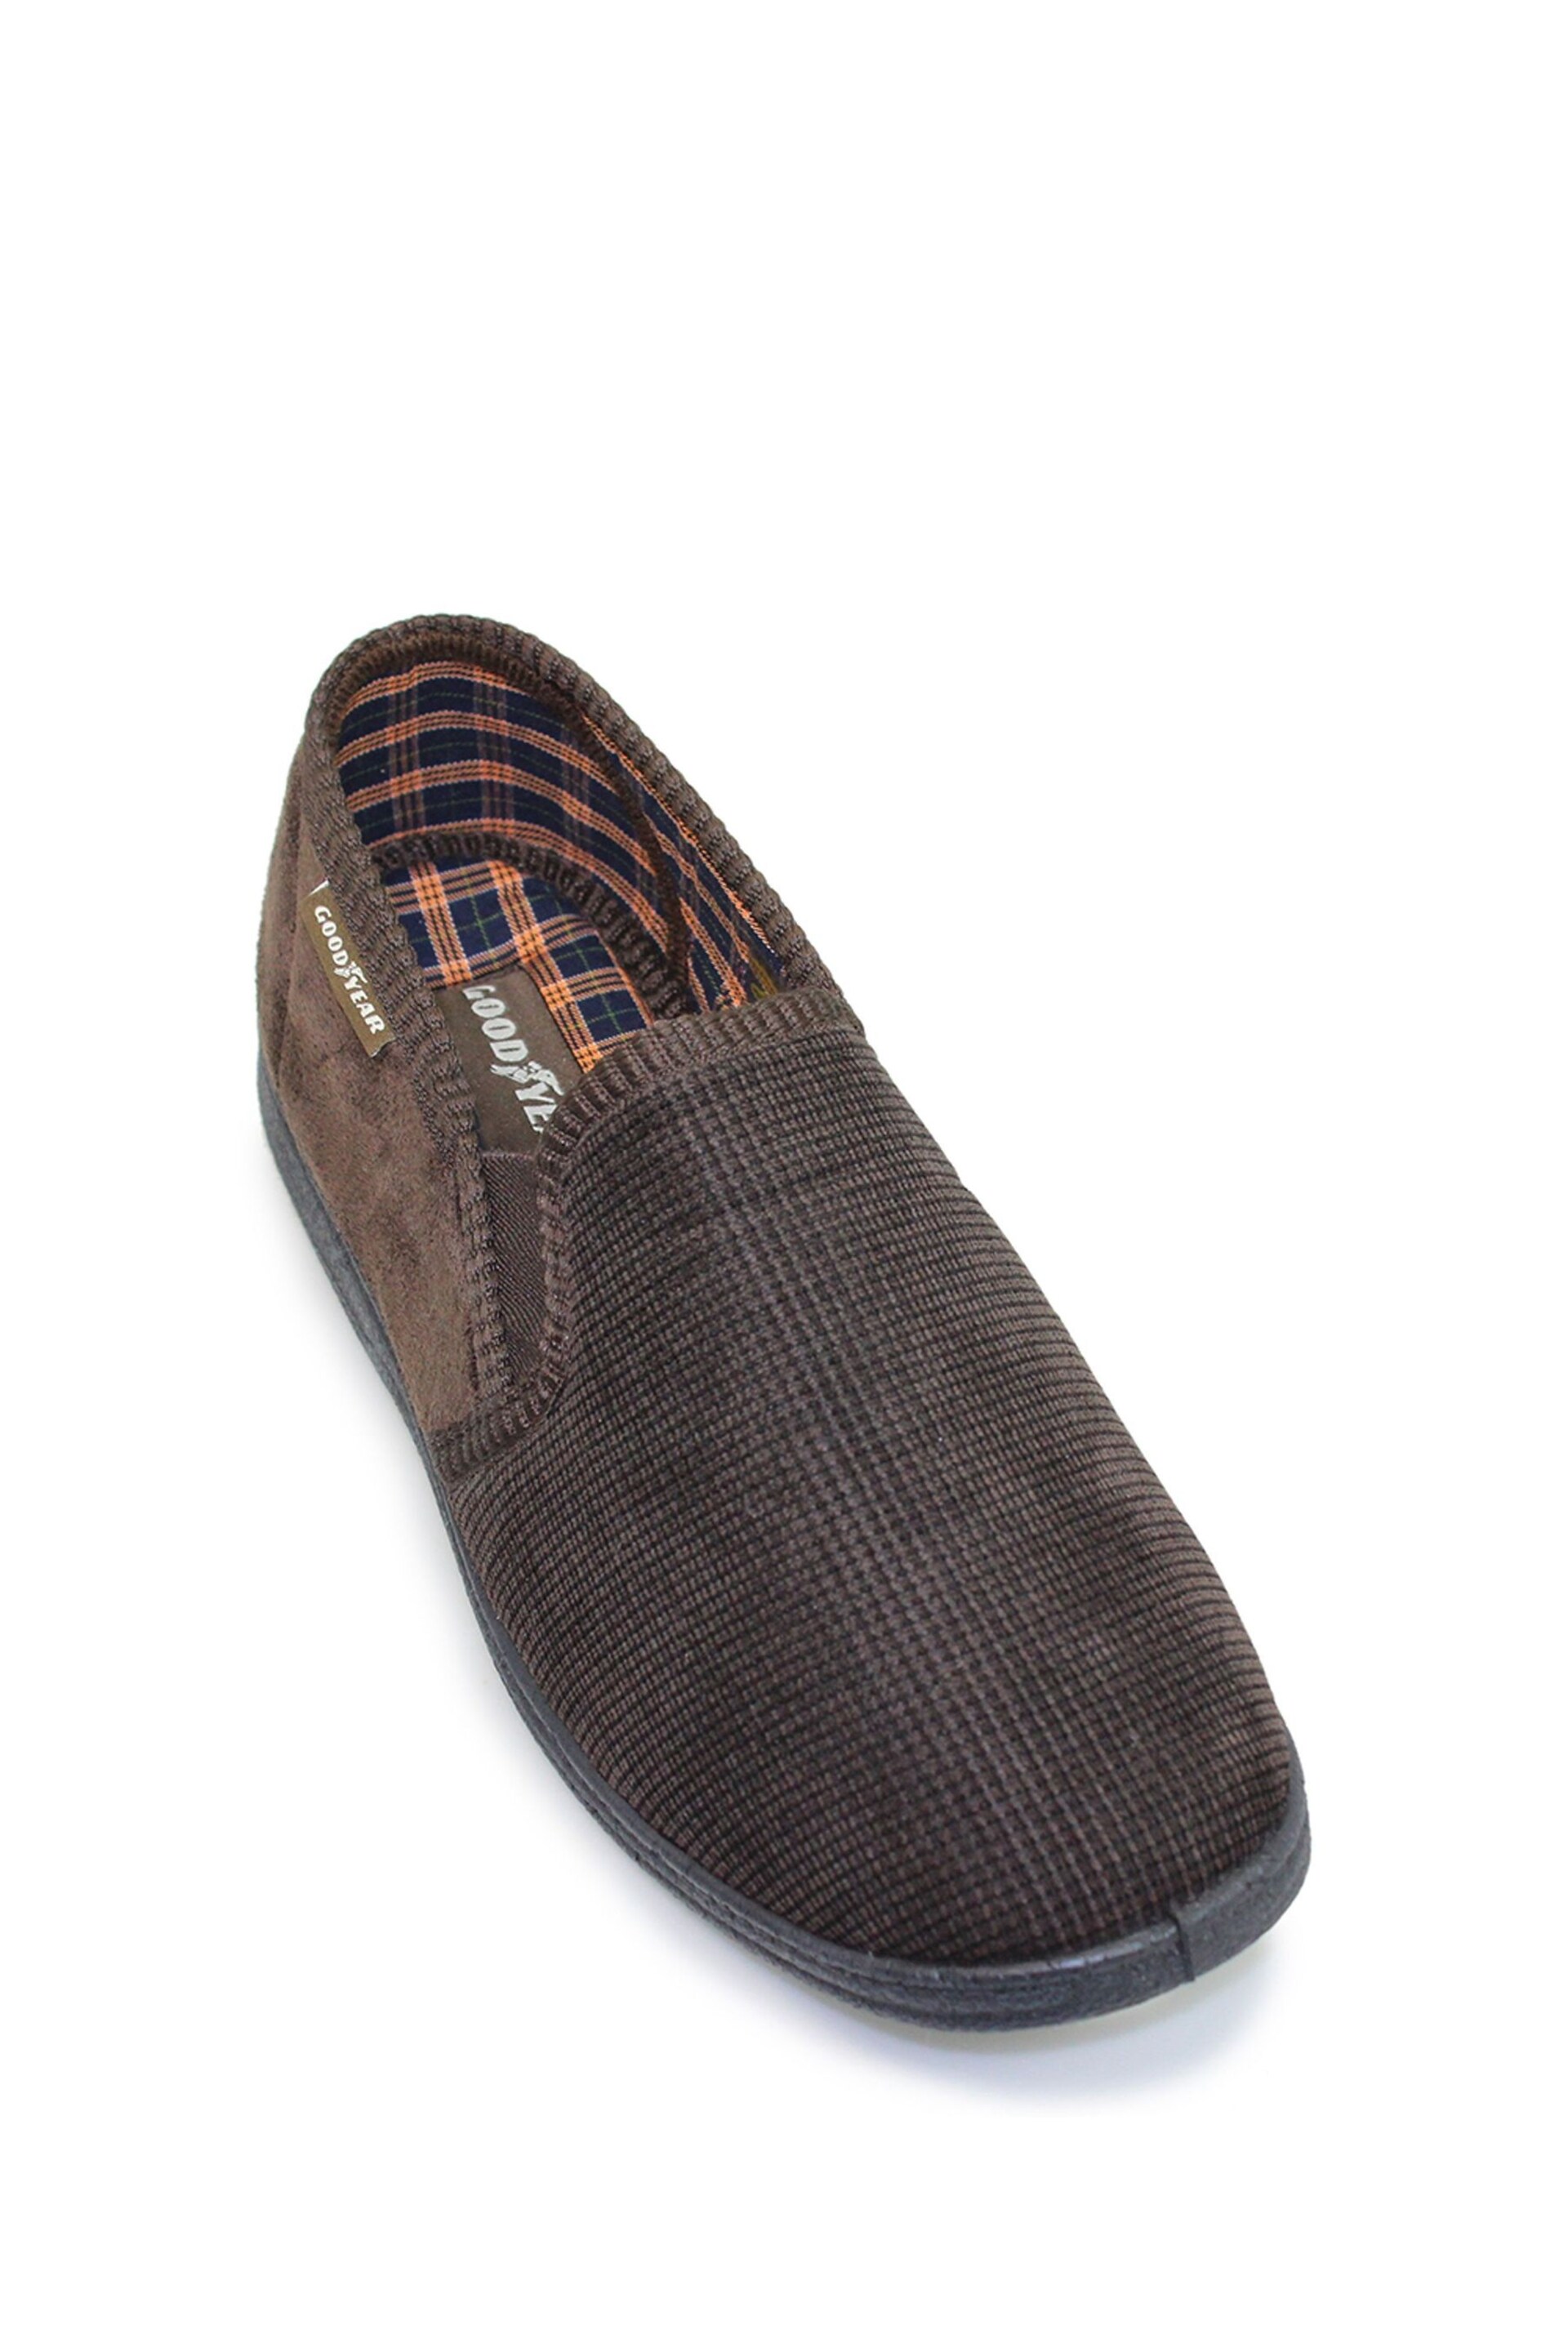 Goodyear Brown Mallory Brown Full Slippers - Image 3 of 4